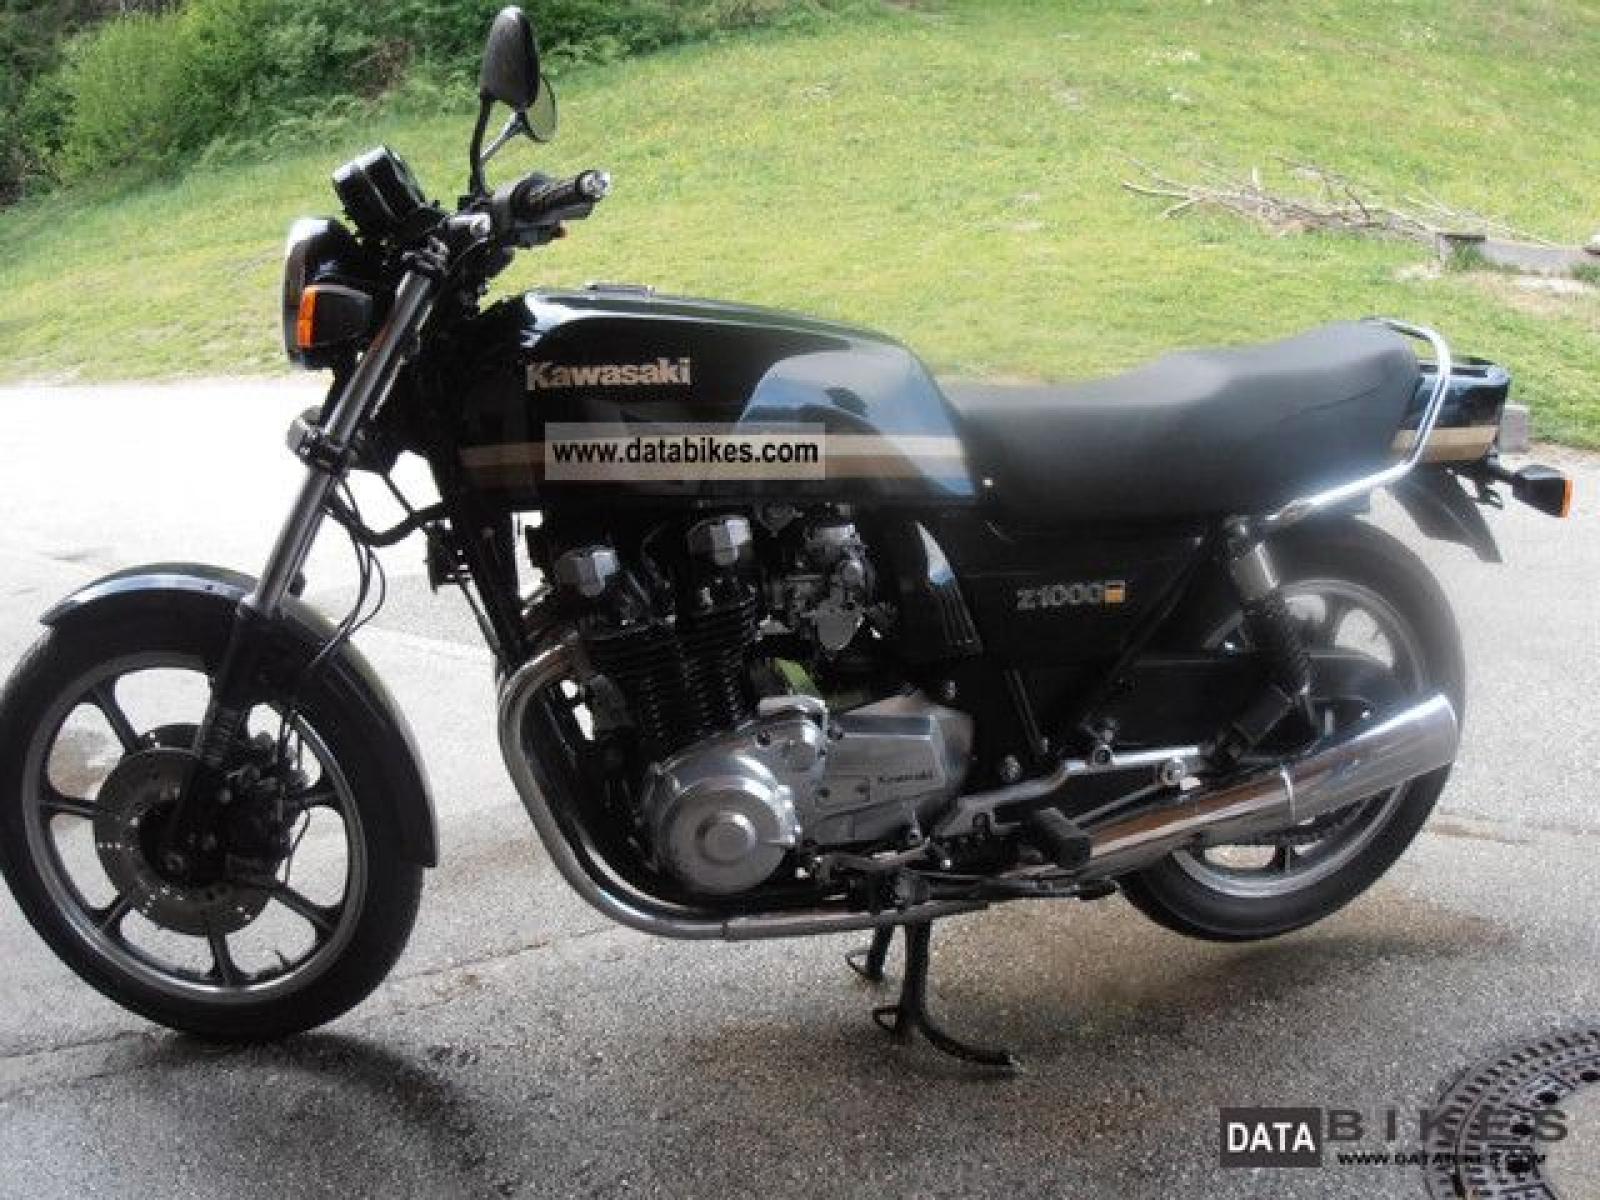 1983 Kawasaki Z1000J is listed For sale on ClassicDigest 